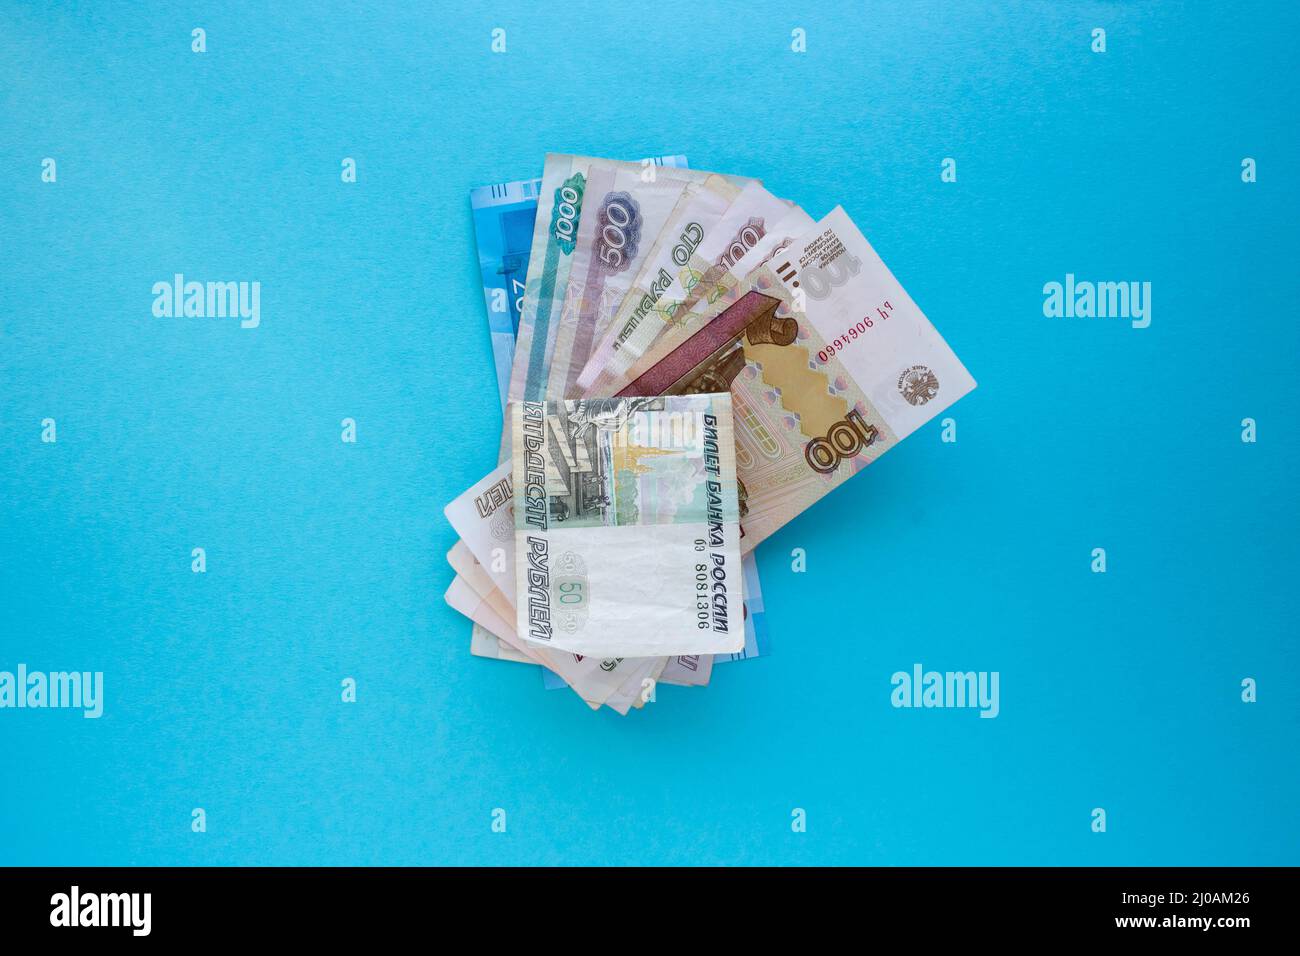 A stack of Russian banknotes. A bundle of Russian money on a blue background. Stock Photo